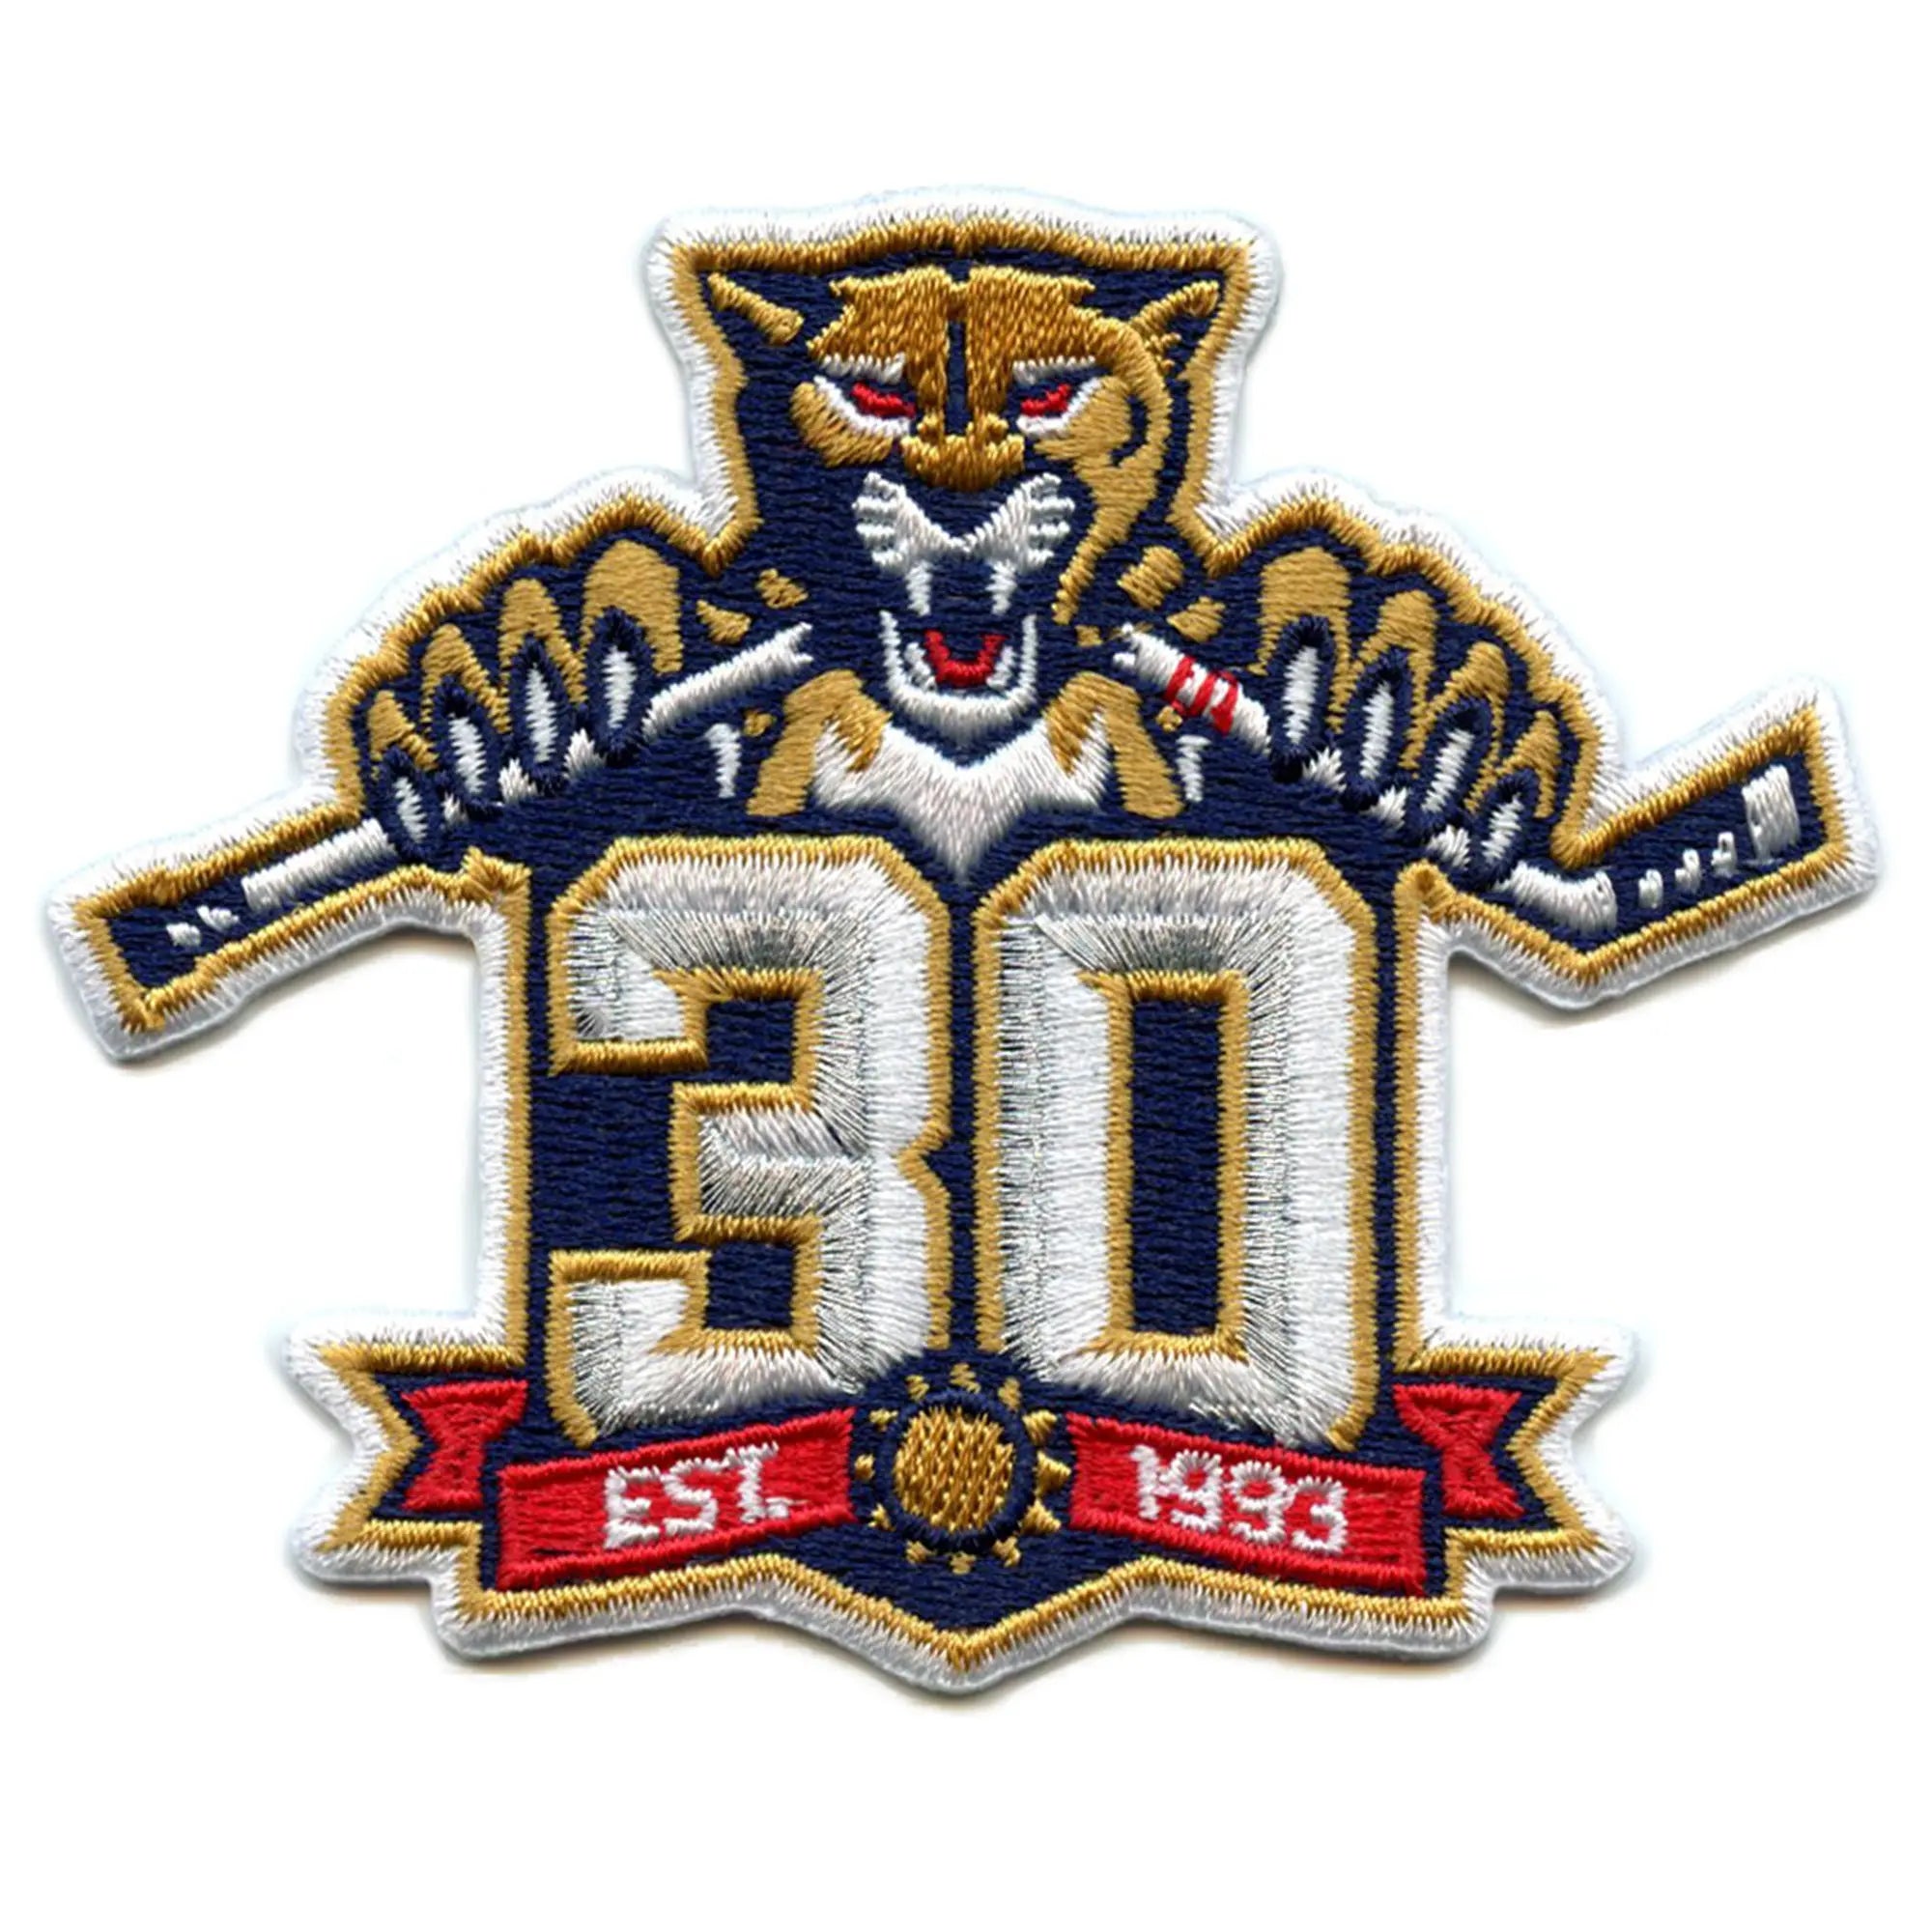 Florida Panthers Hall of Fame jersey